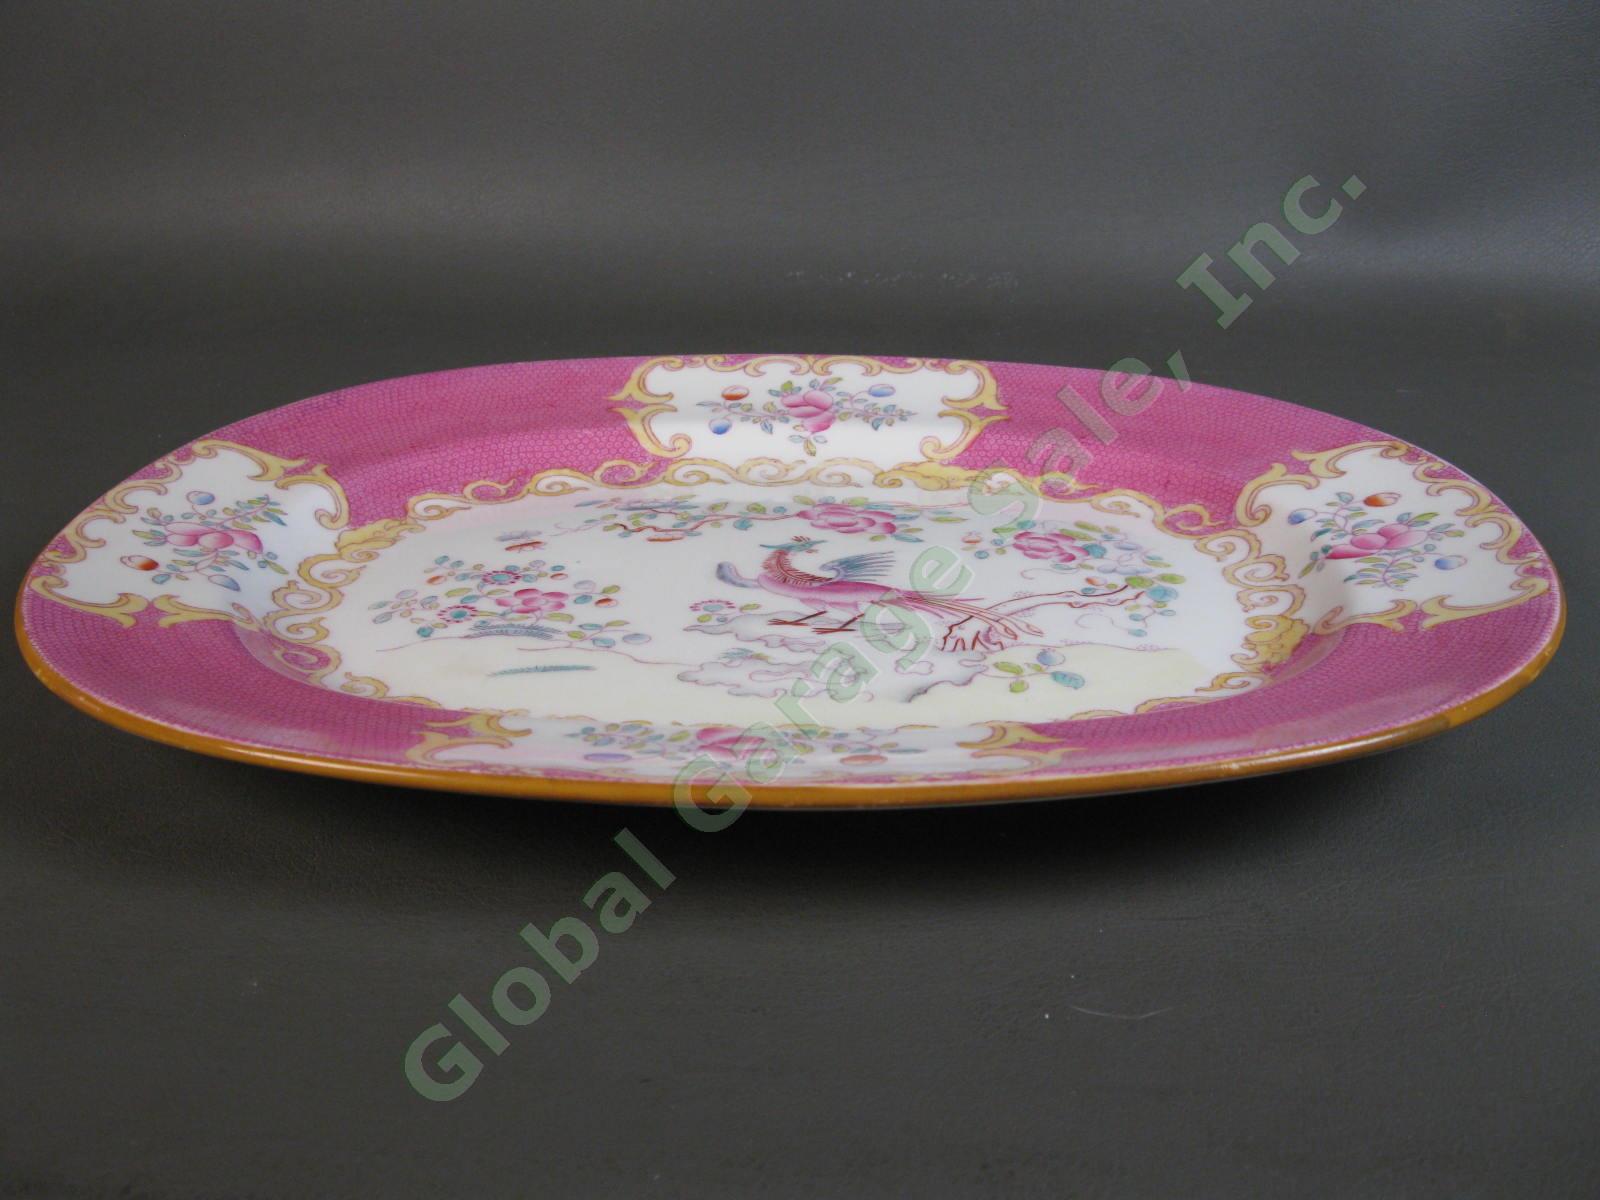 RARE Minton Cockatrice Pink 13" In Oval Serving Platter Smooth Globe Pre 1951 NR 2